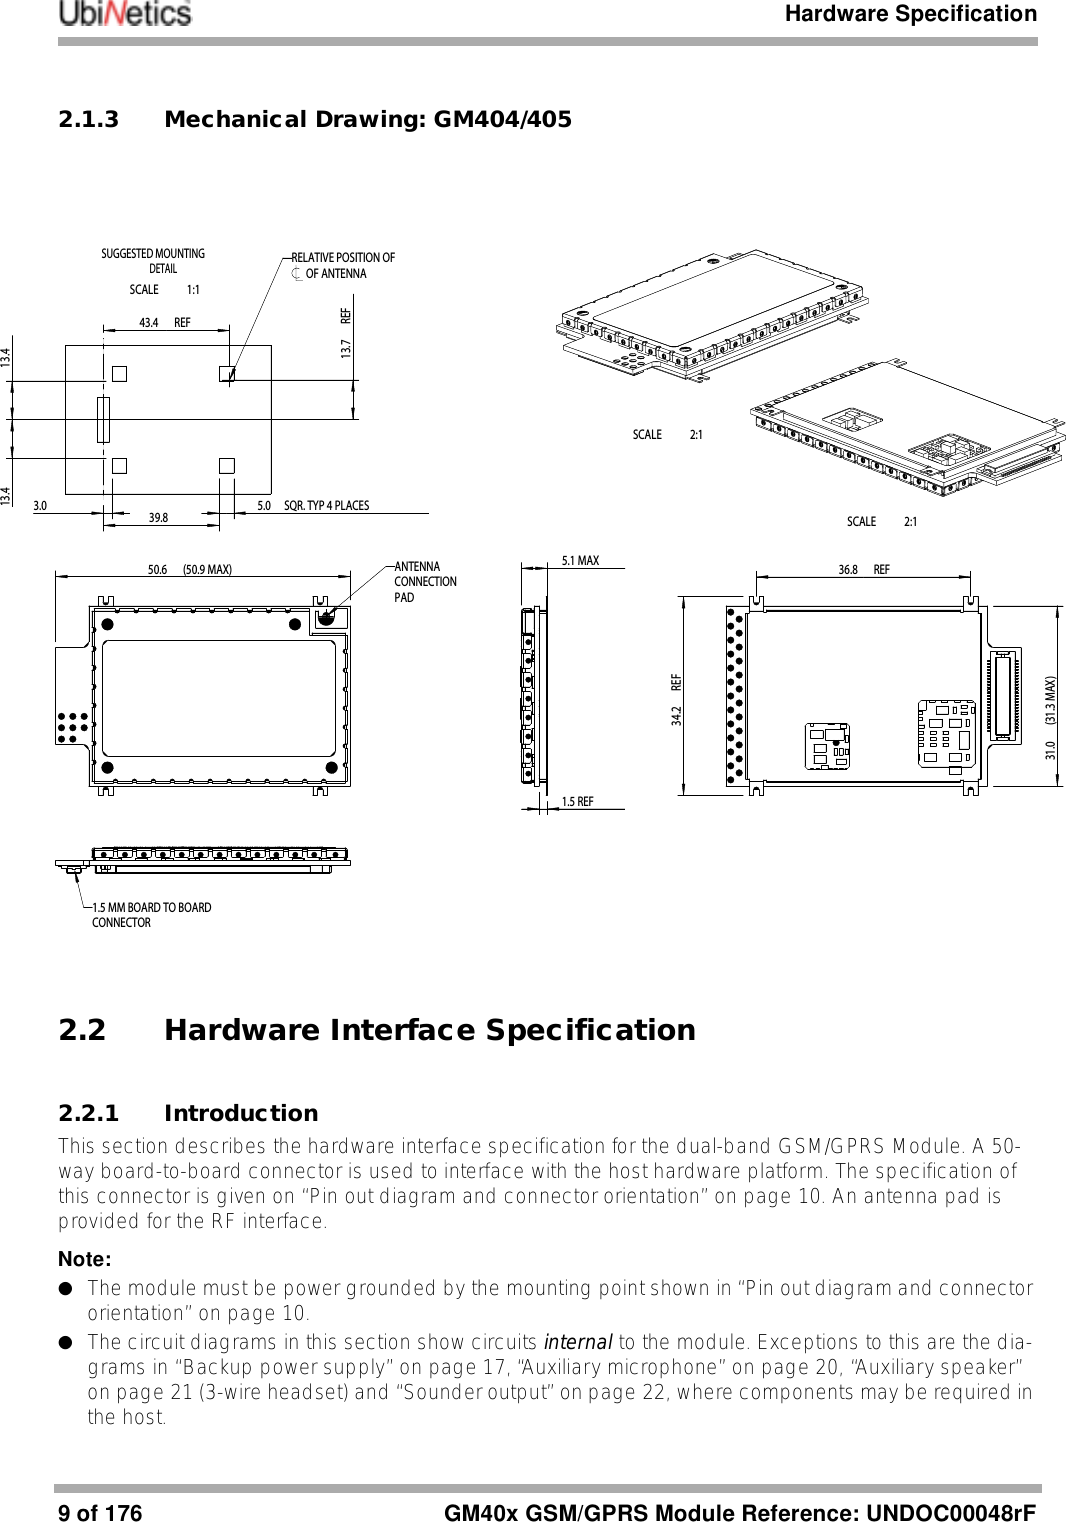 Hardware Specification9of 176 GM40x GSM/GPRS Module Reference: UNDOC00048rF2.1.3 Mechanical Drawing: GM404/4052.2 Hardware Interface Specification2.2.1 IntroductionThis section describes the hardware interface specification for the dual-band GSM/GPRS Module. A 50-way board-to-board connector is used to interface with the host hardware platform. The specification of this connector is given on “Pin out diagram and connector orientation” on page 10. An antenna pad is provided for the RF interface.Note:●The module must be power grounded by the mounting point shown in “Pin out diagram and connector orientation” on page 10.●The circuit diagrams in this section show circuits internal to the module. Exceptions to this are the dia-grams in “Backup power supply” on page 17, “Auxiliary microphone” on page 20, “Auxiliary speaker” on page 21 (3-wire headset) and “Sounder output” on page 22, where components may be required in the host. (50.9 MAX)50.6 (31.3 MAX)31.0 5.1 MAX 1.5 REF3.039.8 SQR. TYP 4 PLACES5.013.413.4 REF34.2 REF36.8 REF43.4 REF13.7ANTENNACONNECTIONPADSCALE   2:1SCALE   2:1RELATIVE POSITION OFOF ANTENNASUGGESTED MOUNTINGDETAILSCALE   1:11.5 MM BOARD TO BOARDCONNECTOR